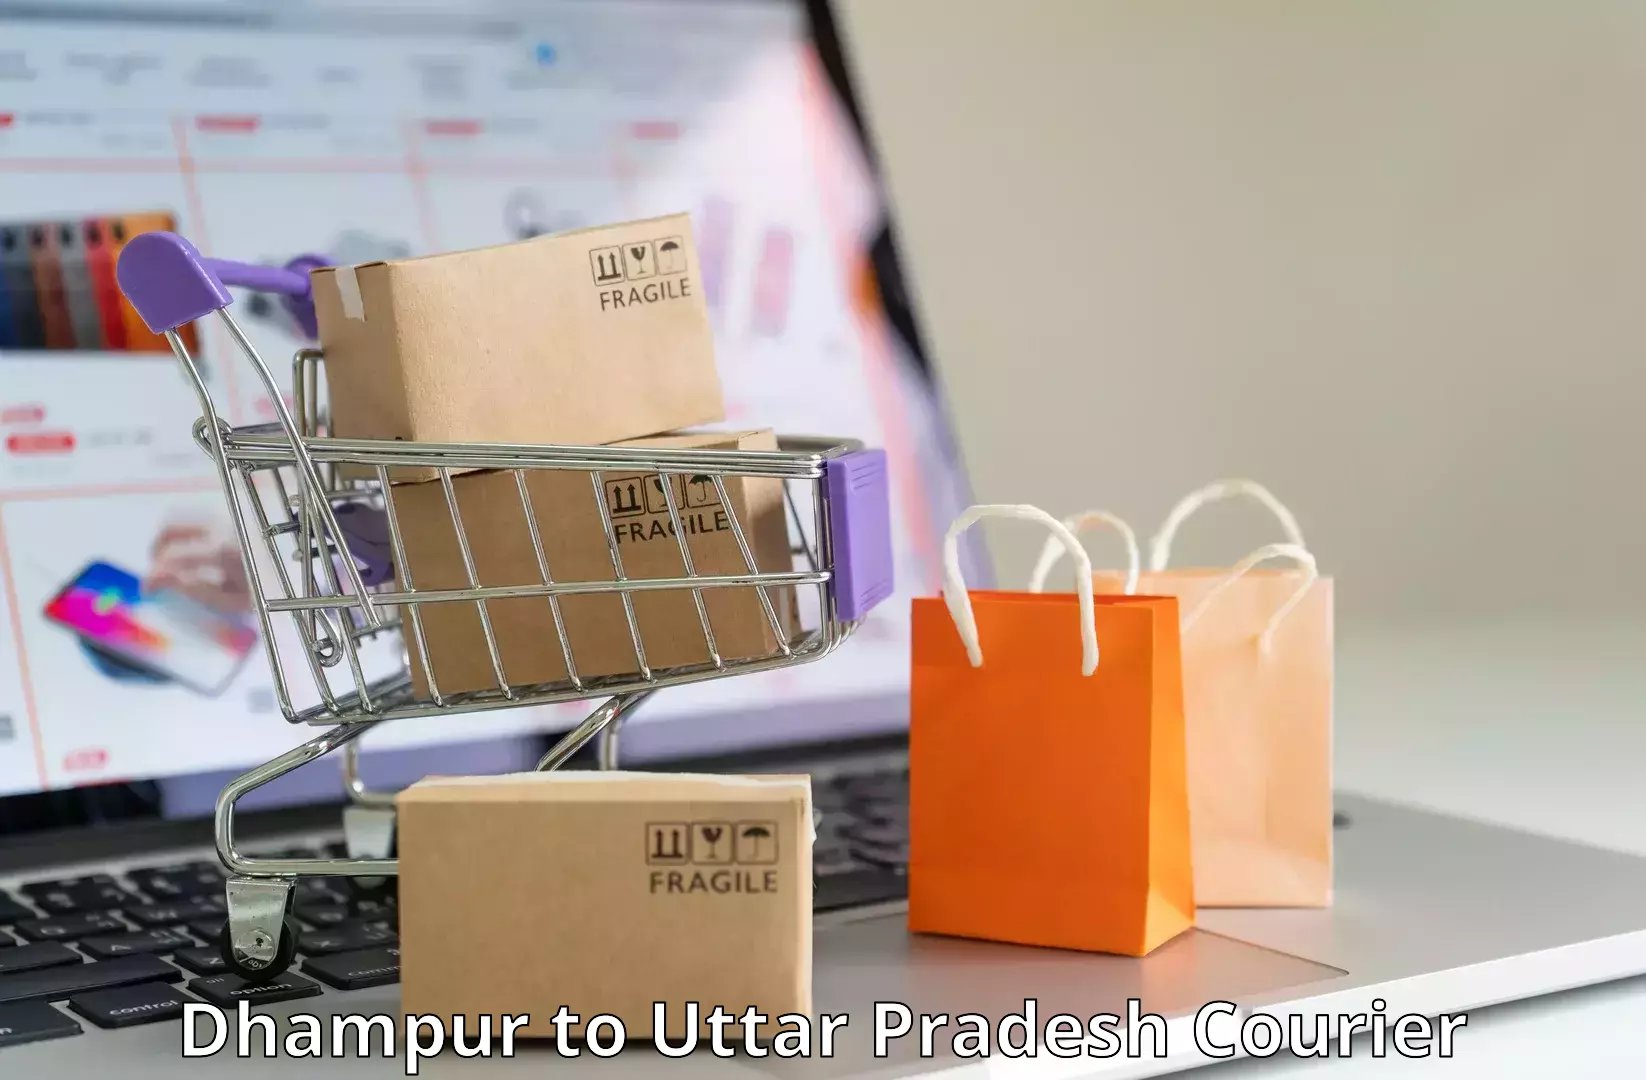 Courier service booking Dhampur to Khair